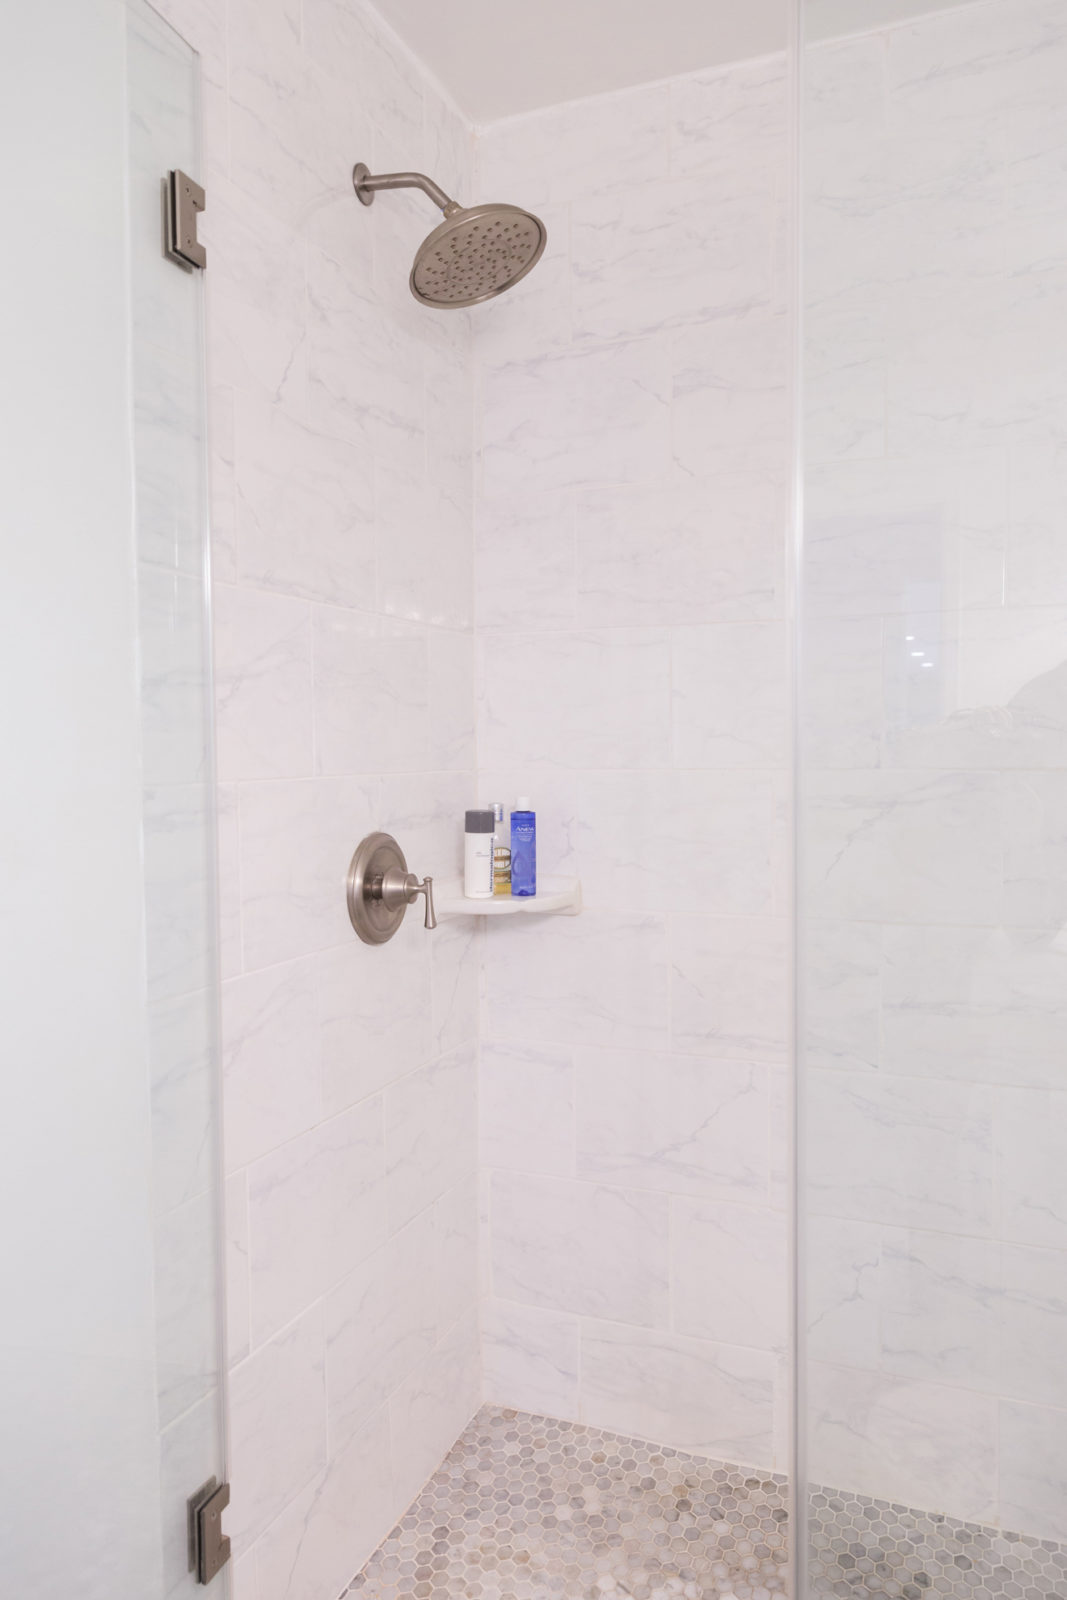 Modern Bathroom Remodel Ideas + Reveal featured by popular US lifestyle blogger, Laura Lily: image of after photo of modern shower remodel with Carrara ceramic wall tile and grey mosaic floor tiles.